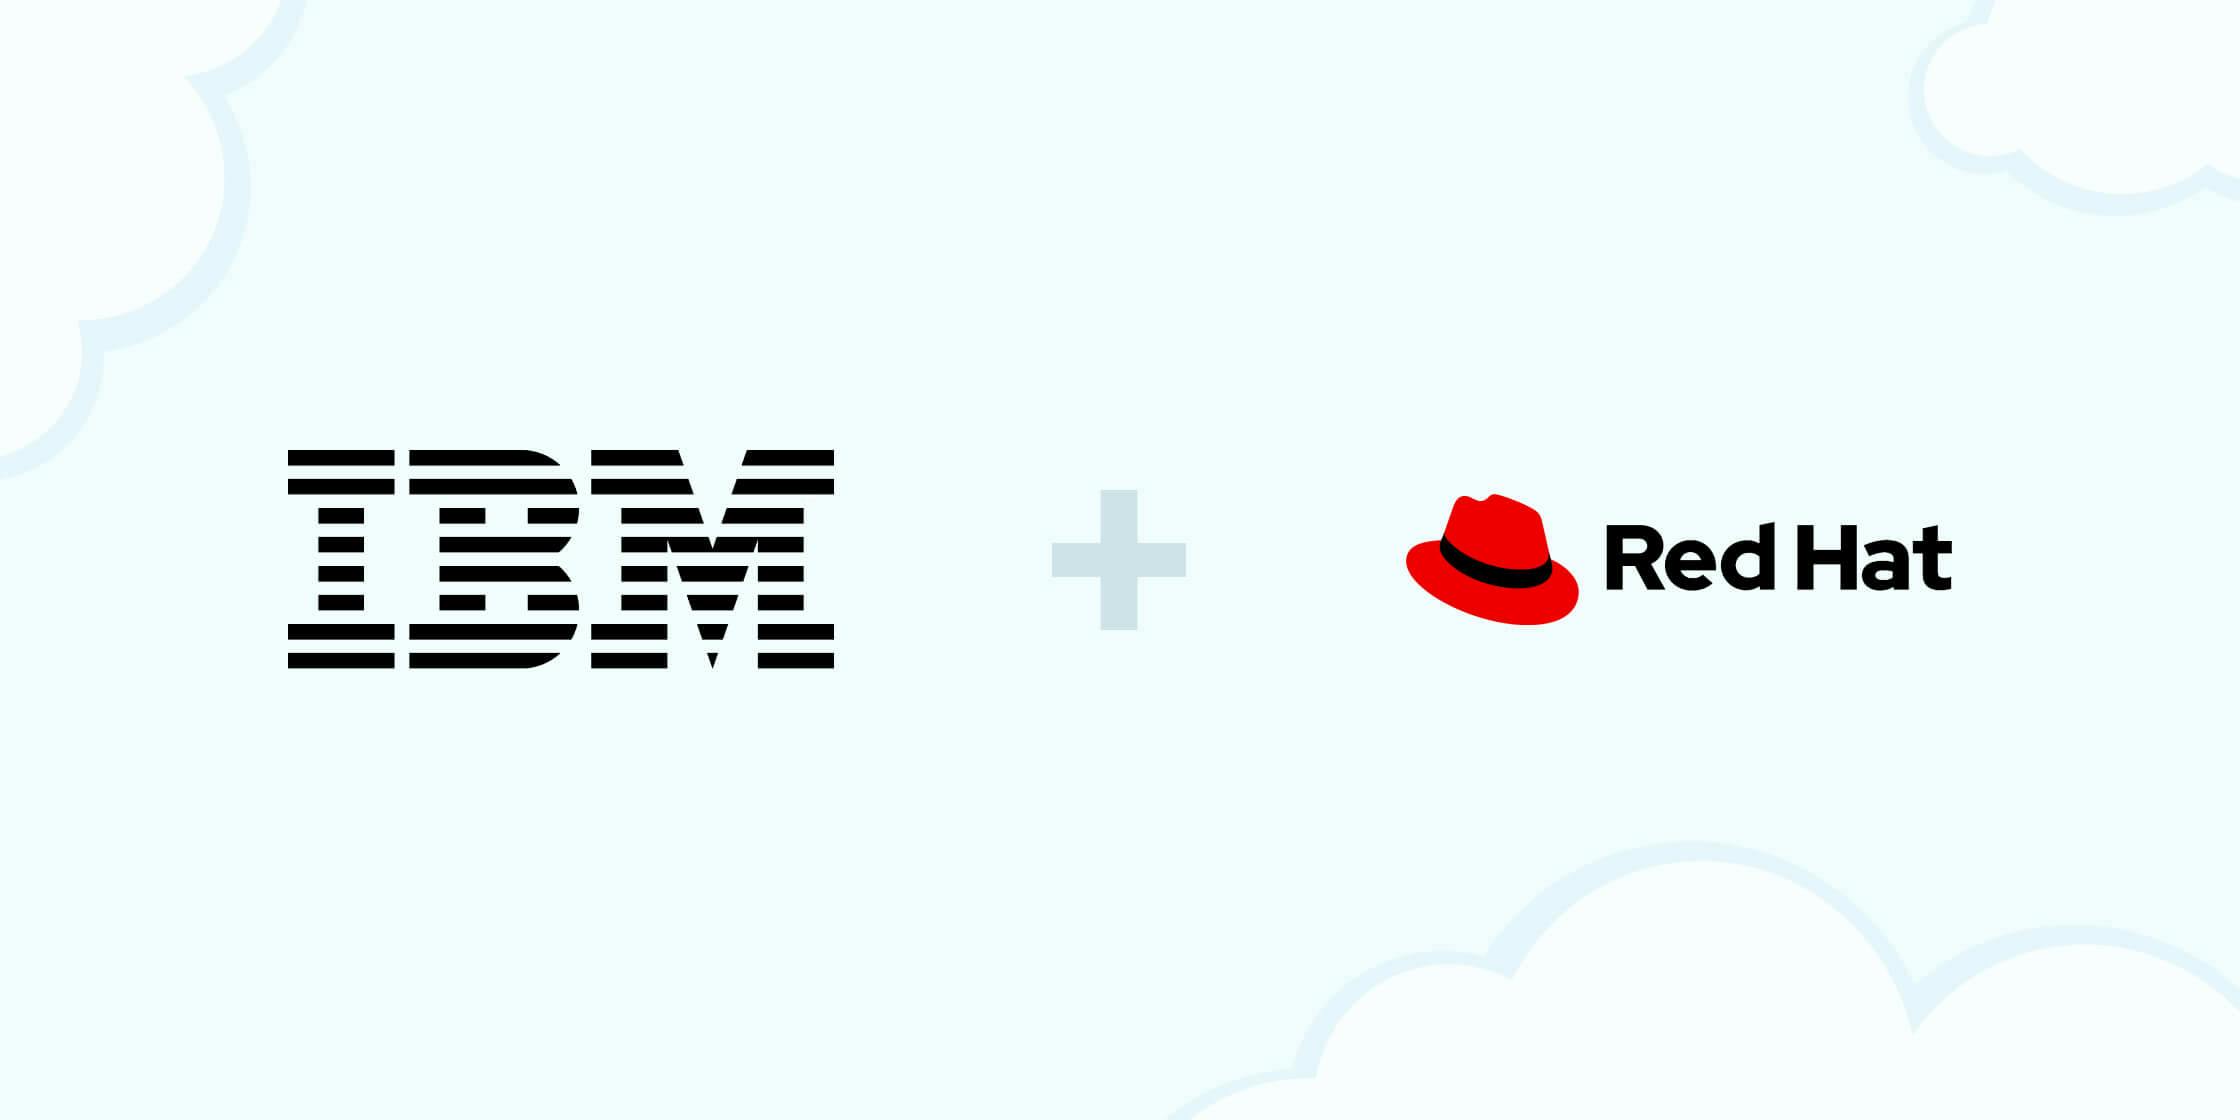 An image of IBM and Red Hat logos